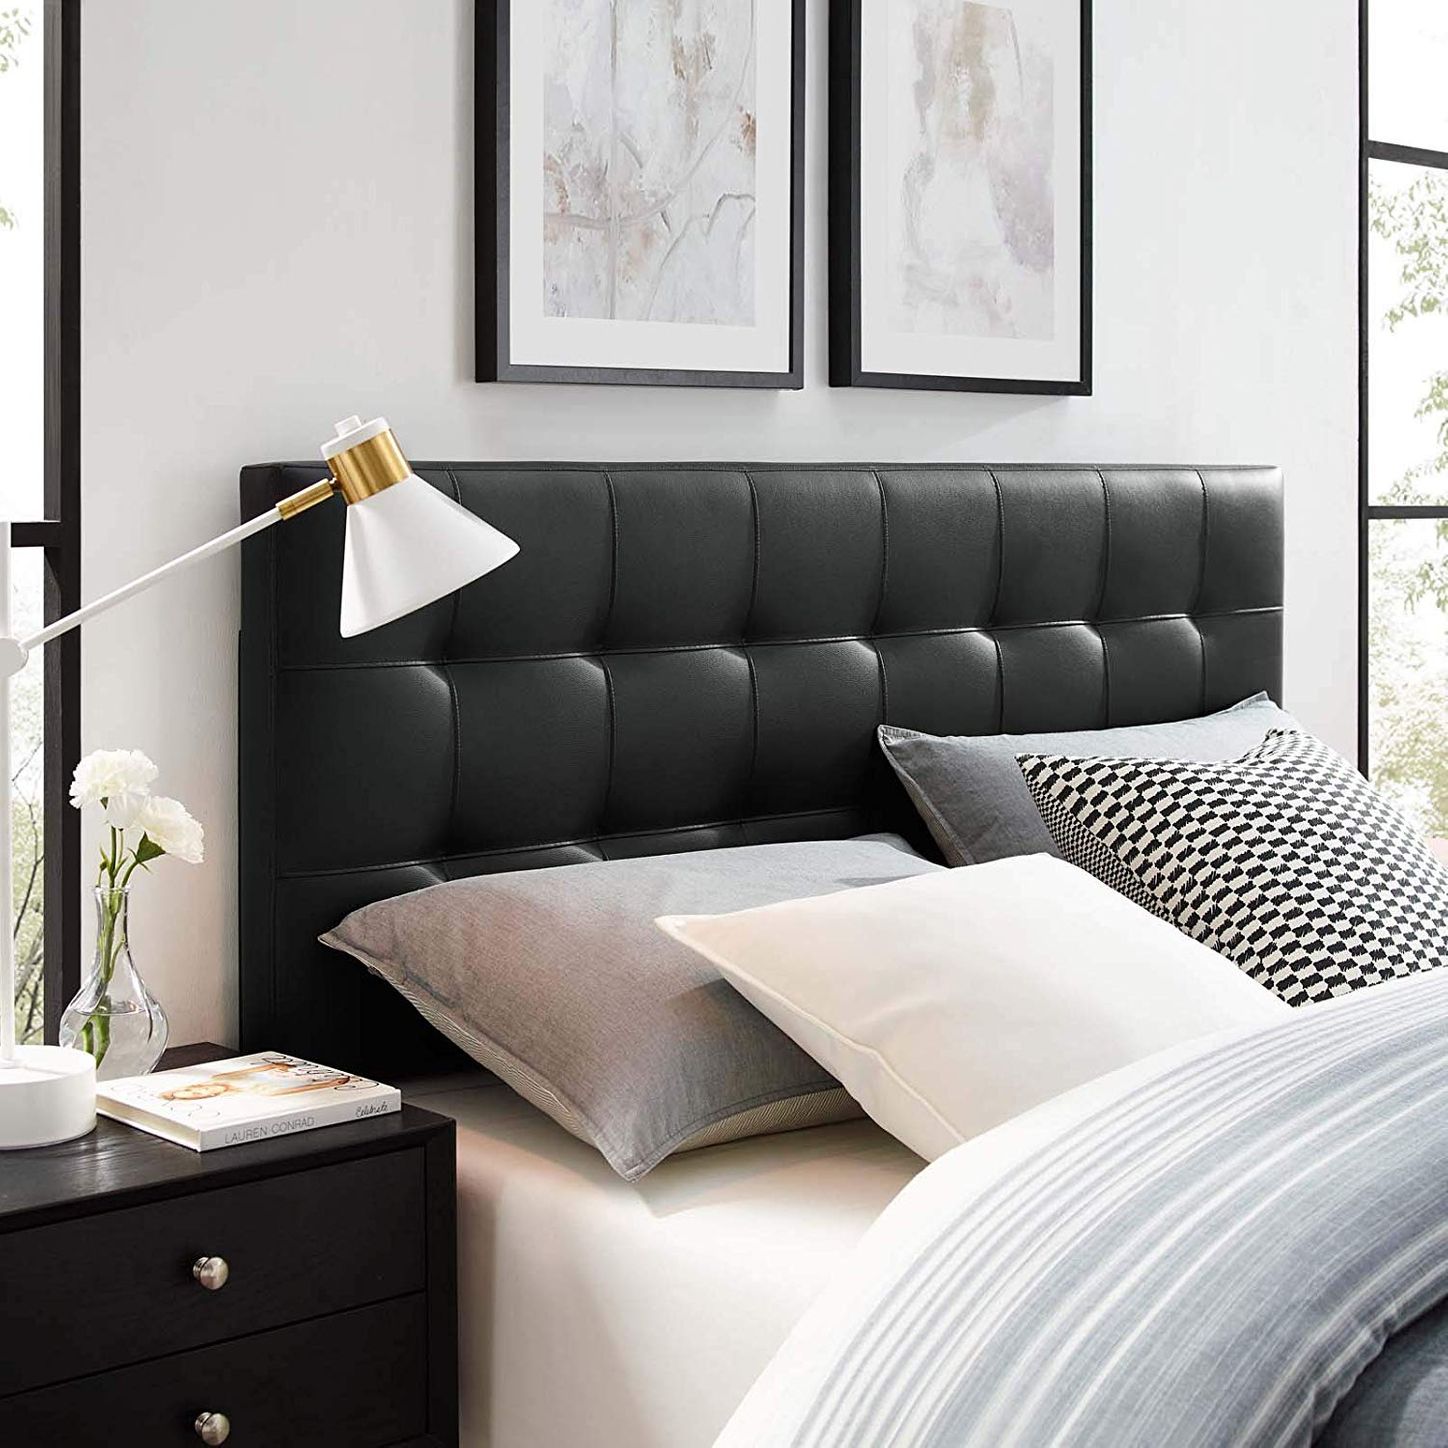 12 Best Headboards 2019 The Strategist, Bedroom Sets With Leather Headboards